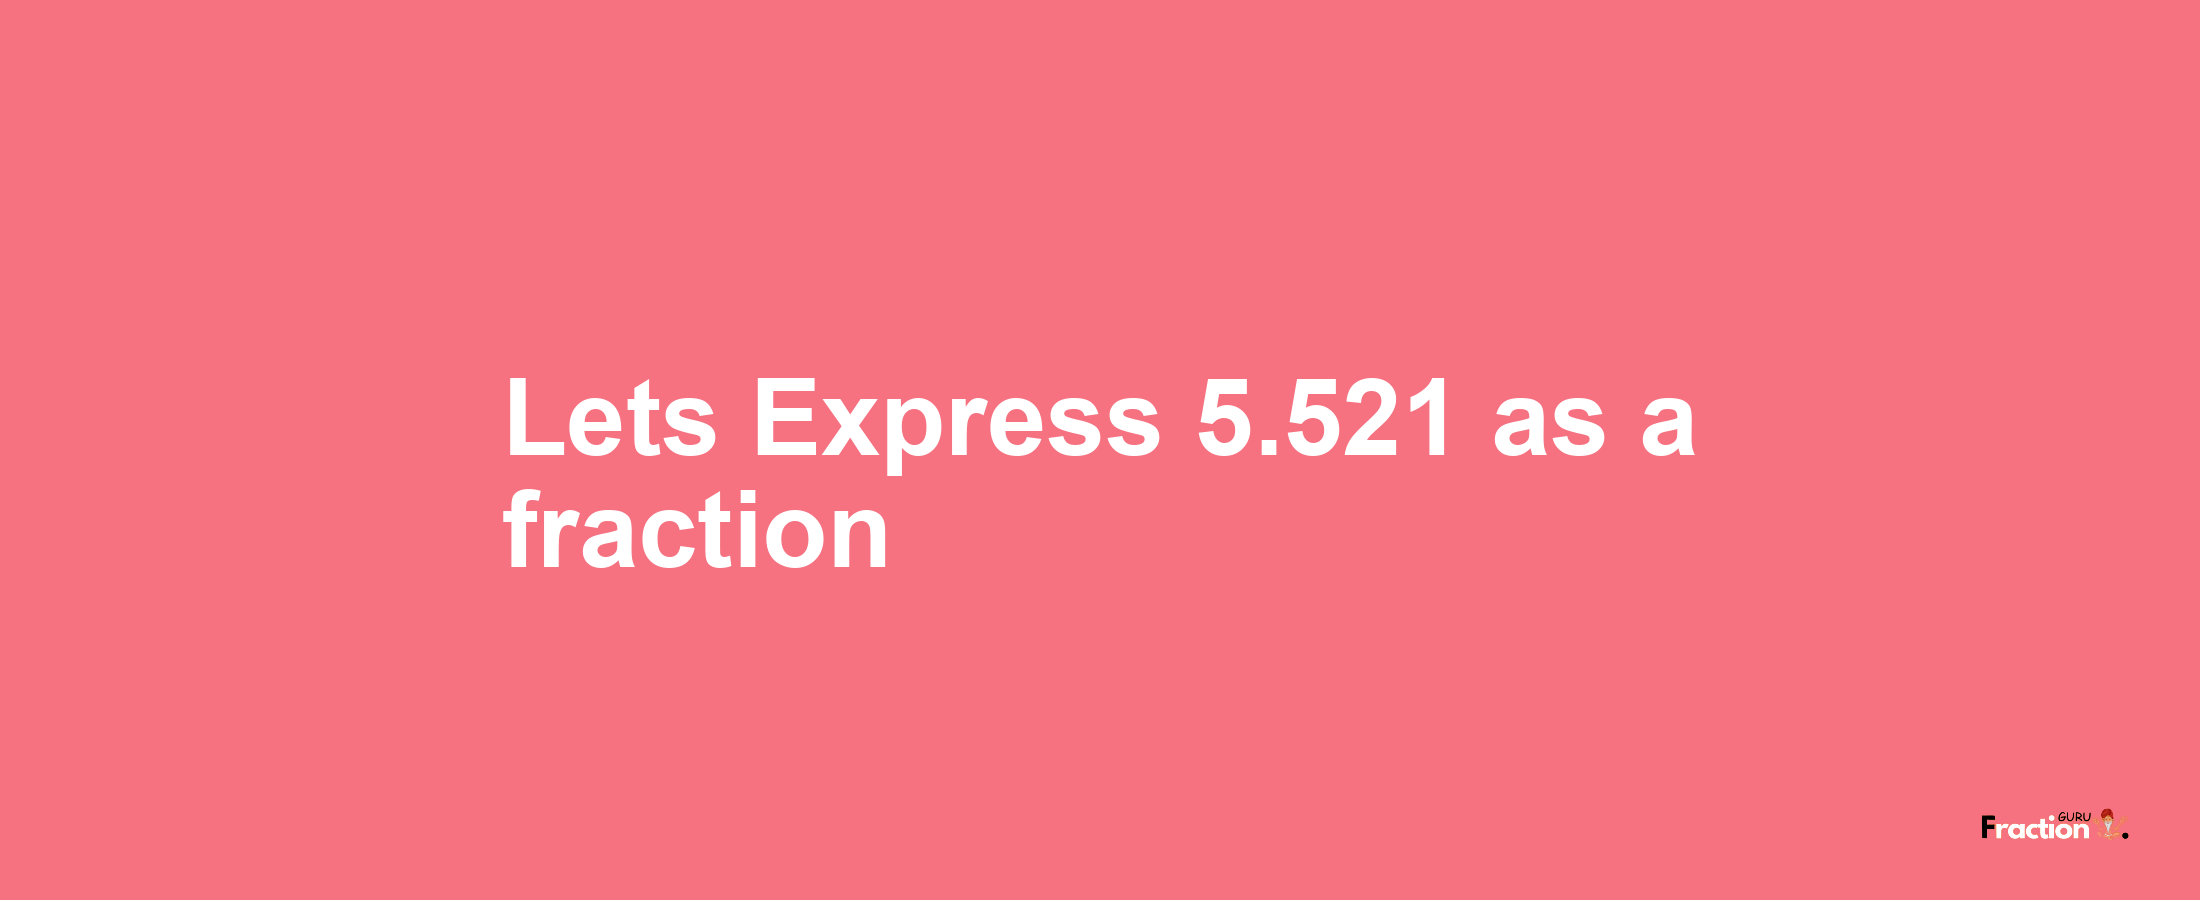 Lets Express 5.521 as afraction